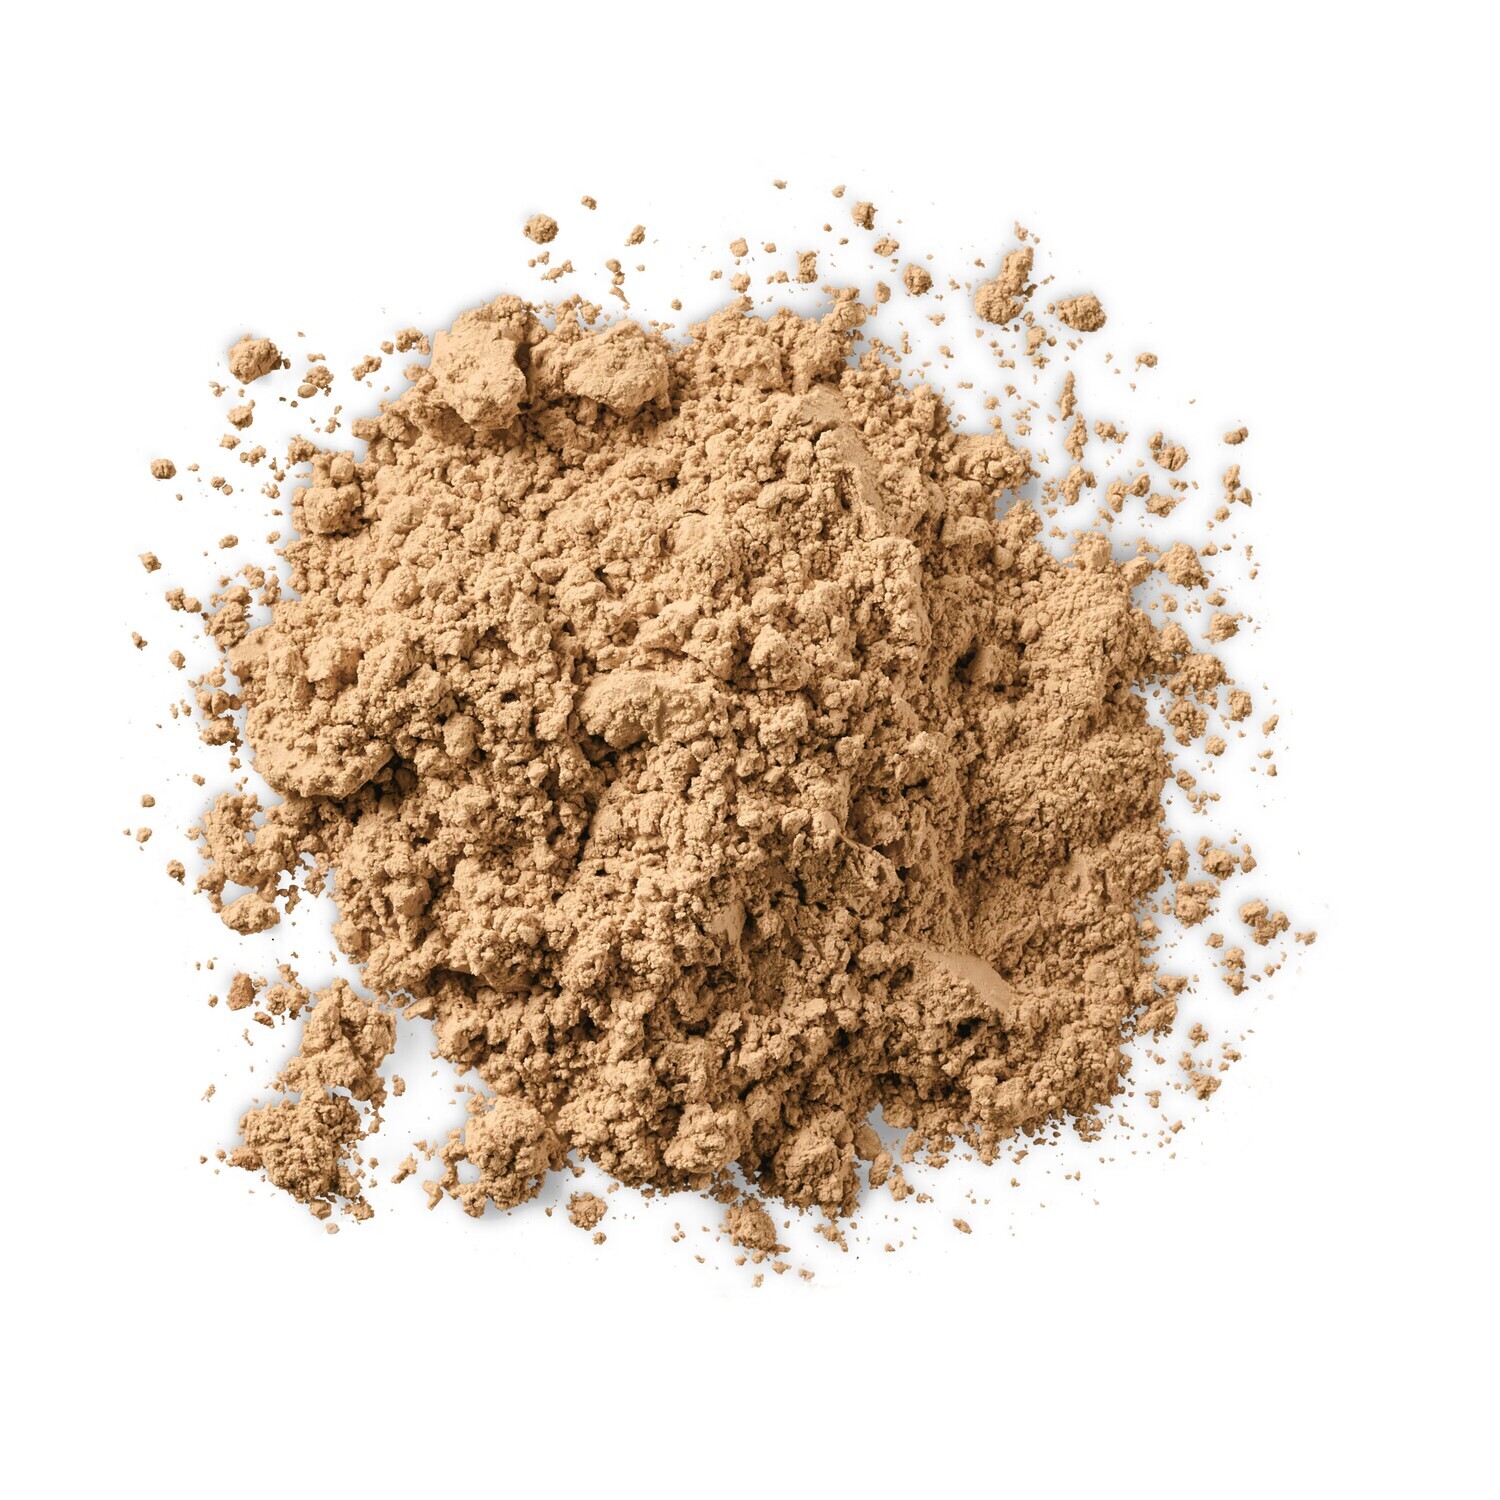 Willow Park Extract powder (100 g)